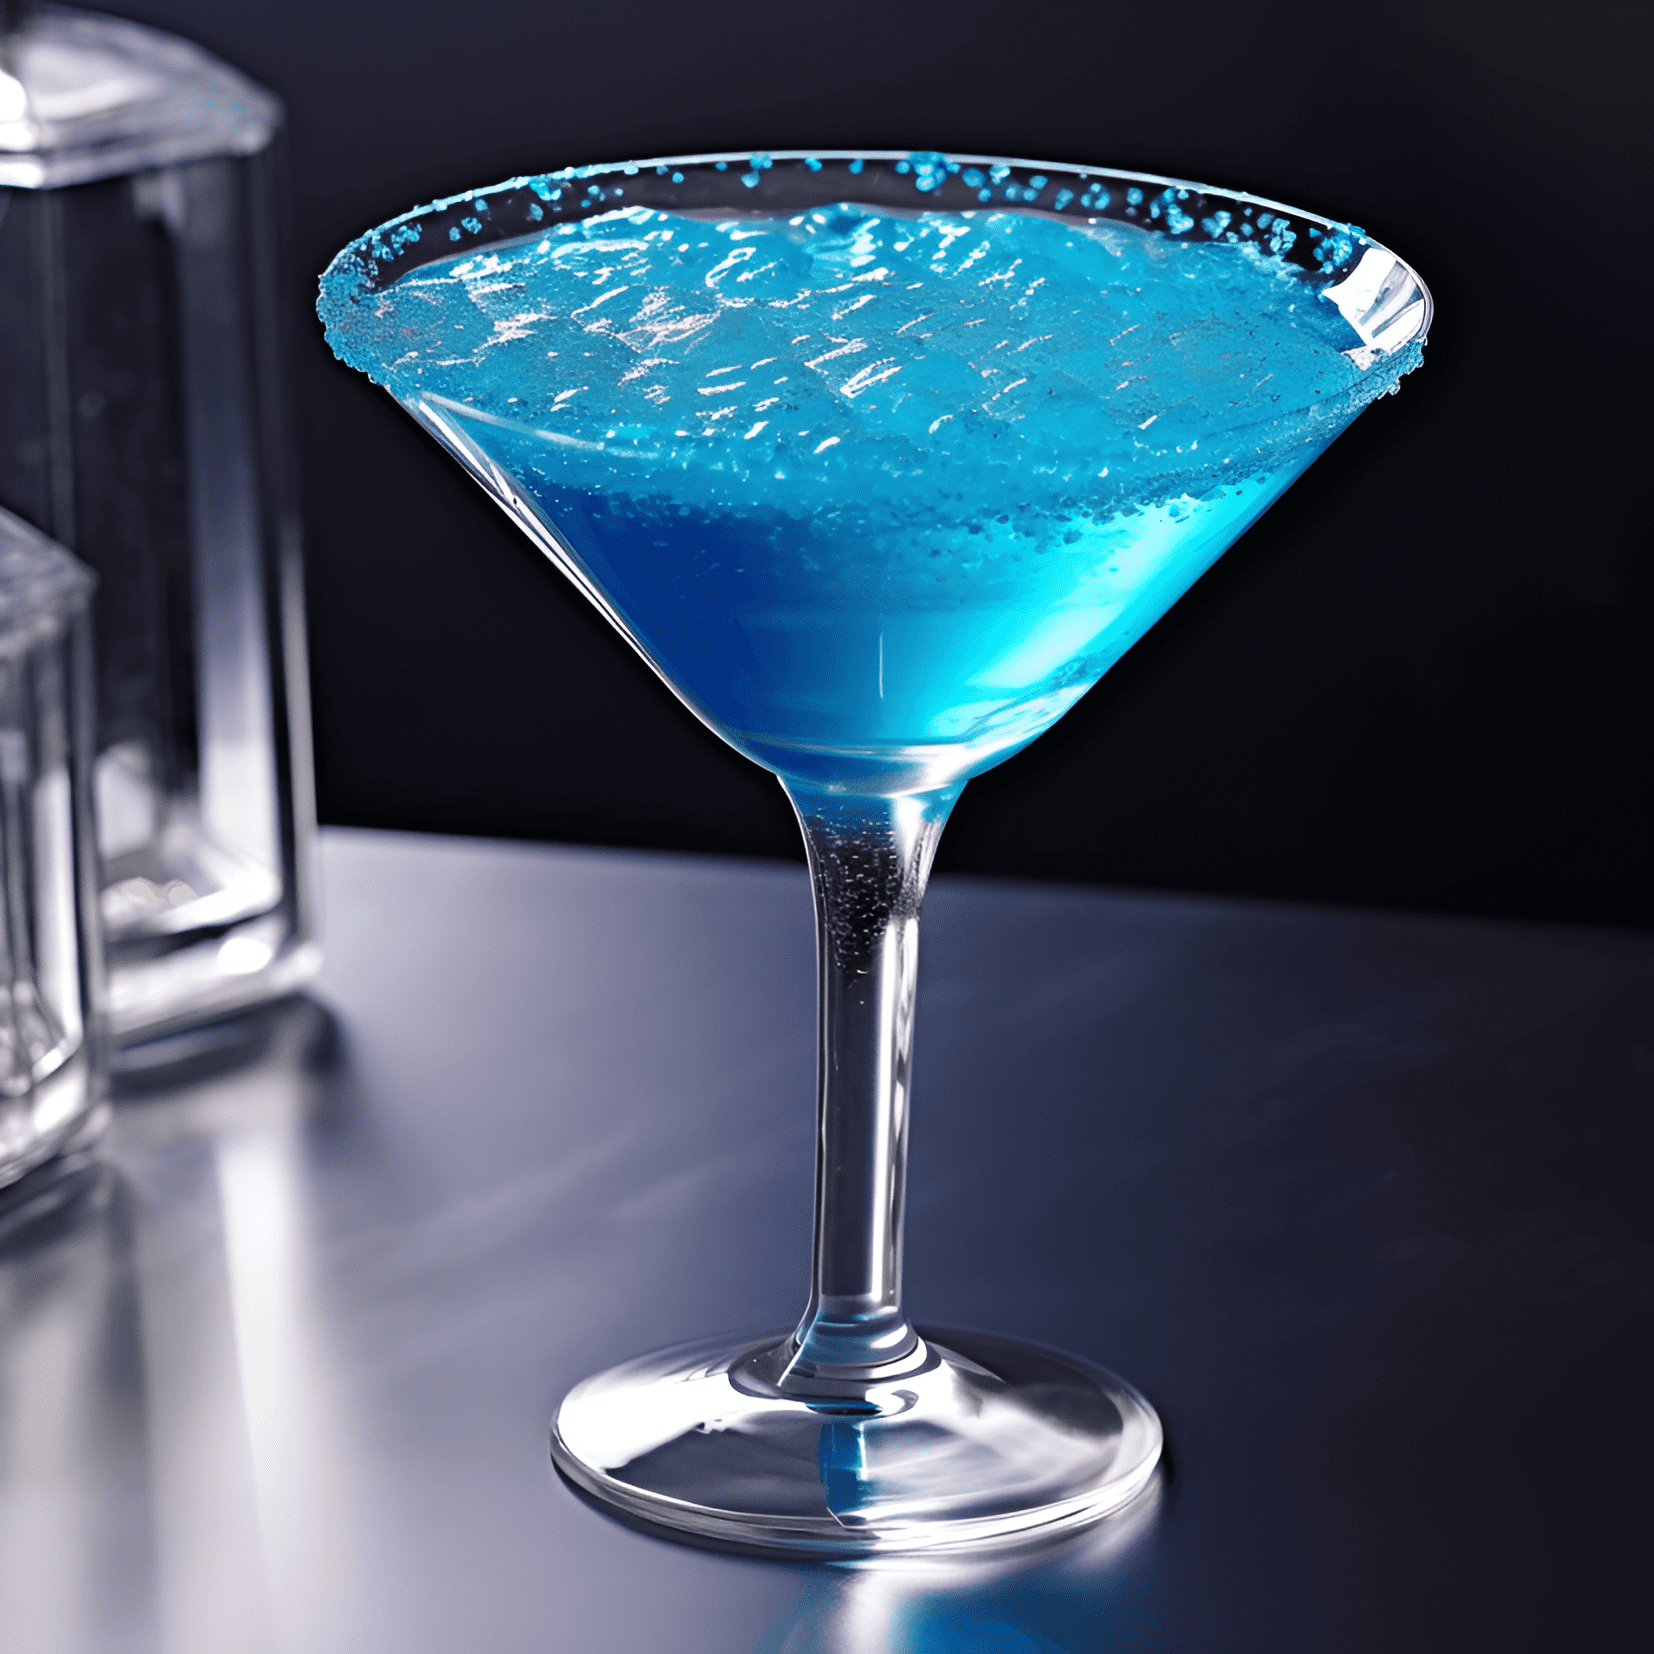 The Frostbite cocktail is a delightful combination of sweet, sour, and minty flavors. It has a cooling and refreshing taste, with a hint of citrus tanginess. The drink is light and crisp, making it the perfect choice for those who enjoy a well-balanced and invigorating cocktail.